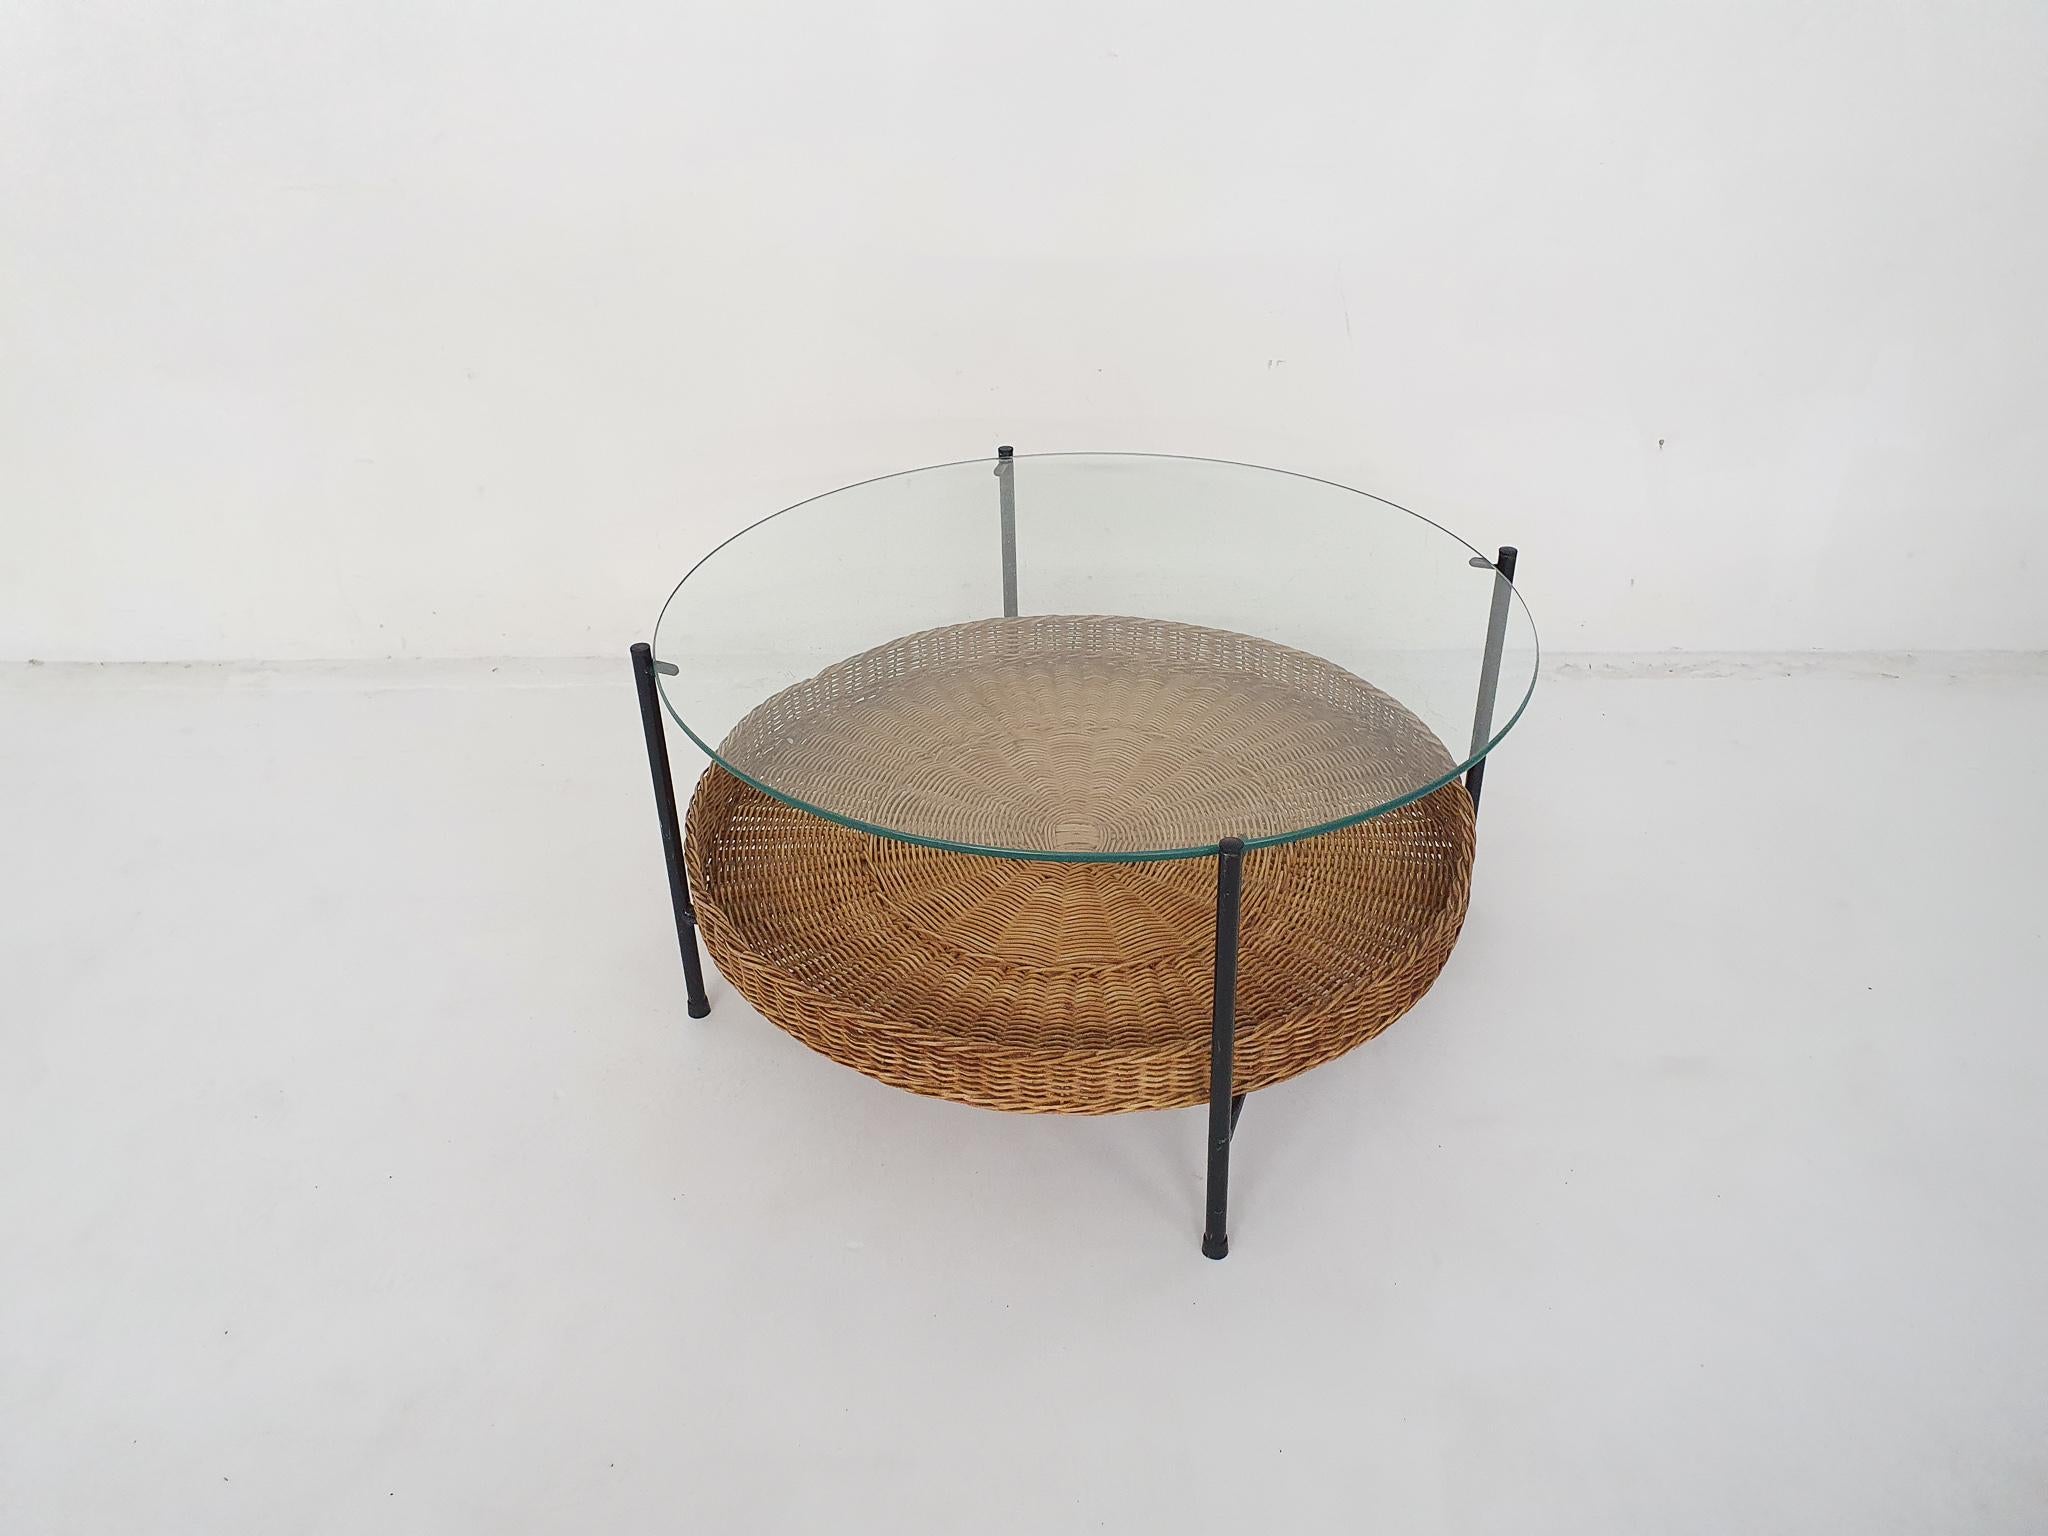 Black metal frame and rattan woven basket for magazines. Glass top has some scratches.